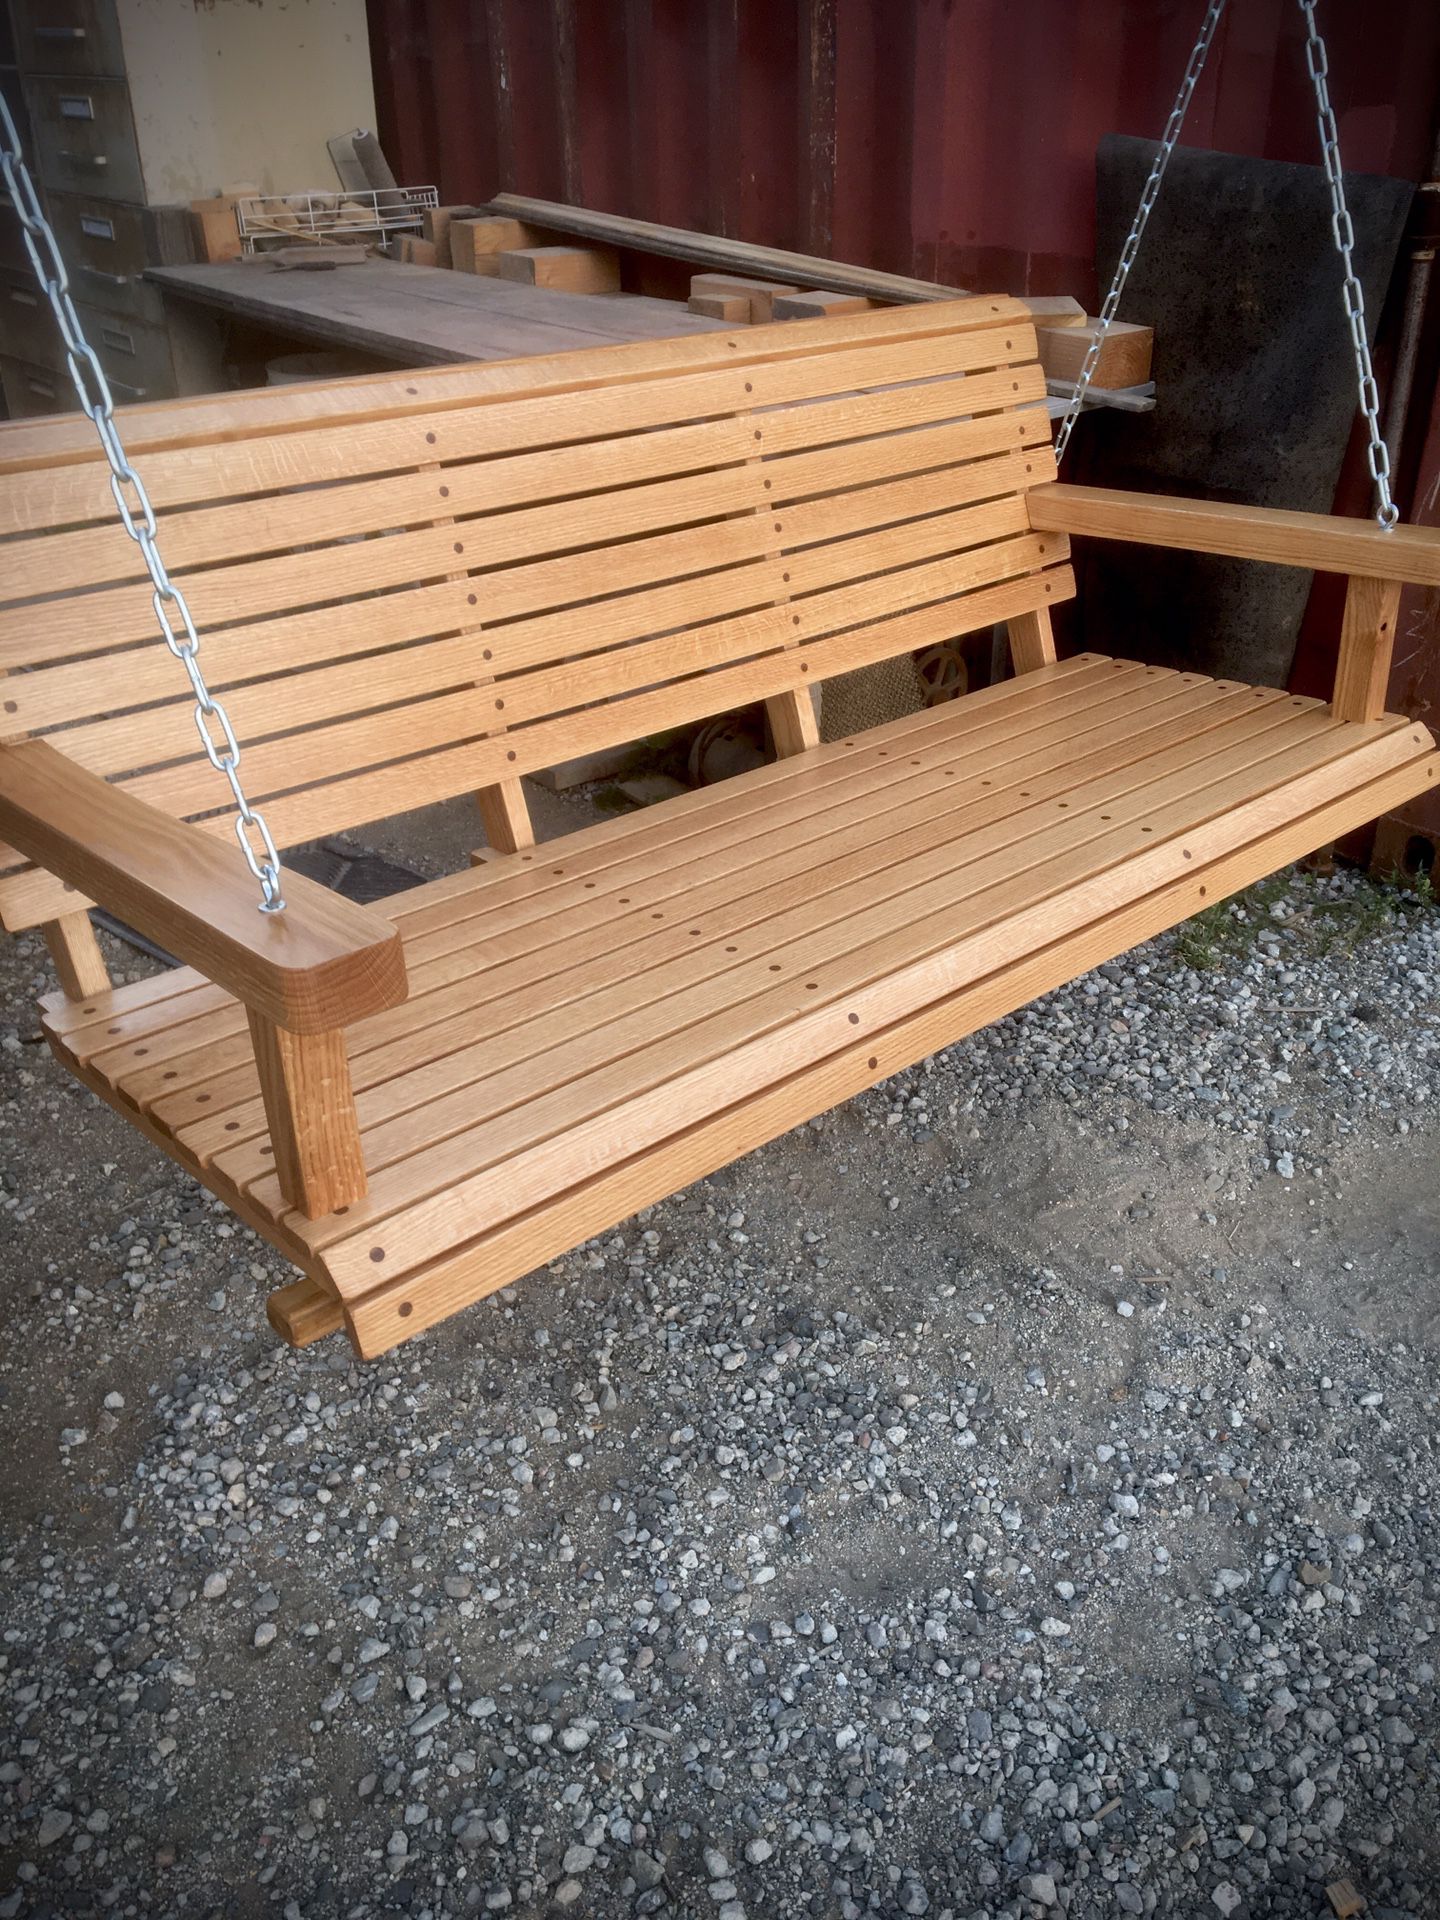 4 1/2 FOOT RED OAK PORCH SWINGS, RIFF SAWN, With Chain Natural Oil Finish $450